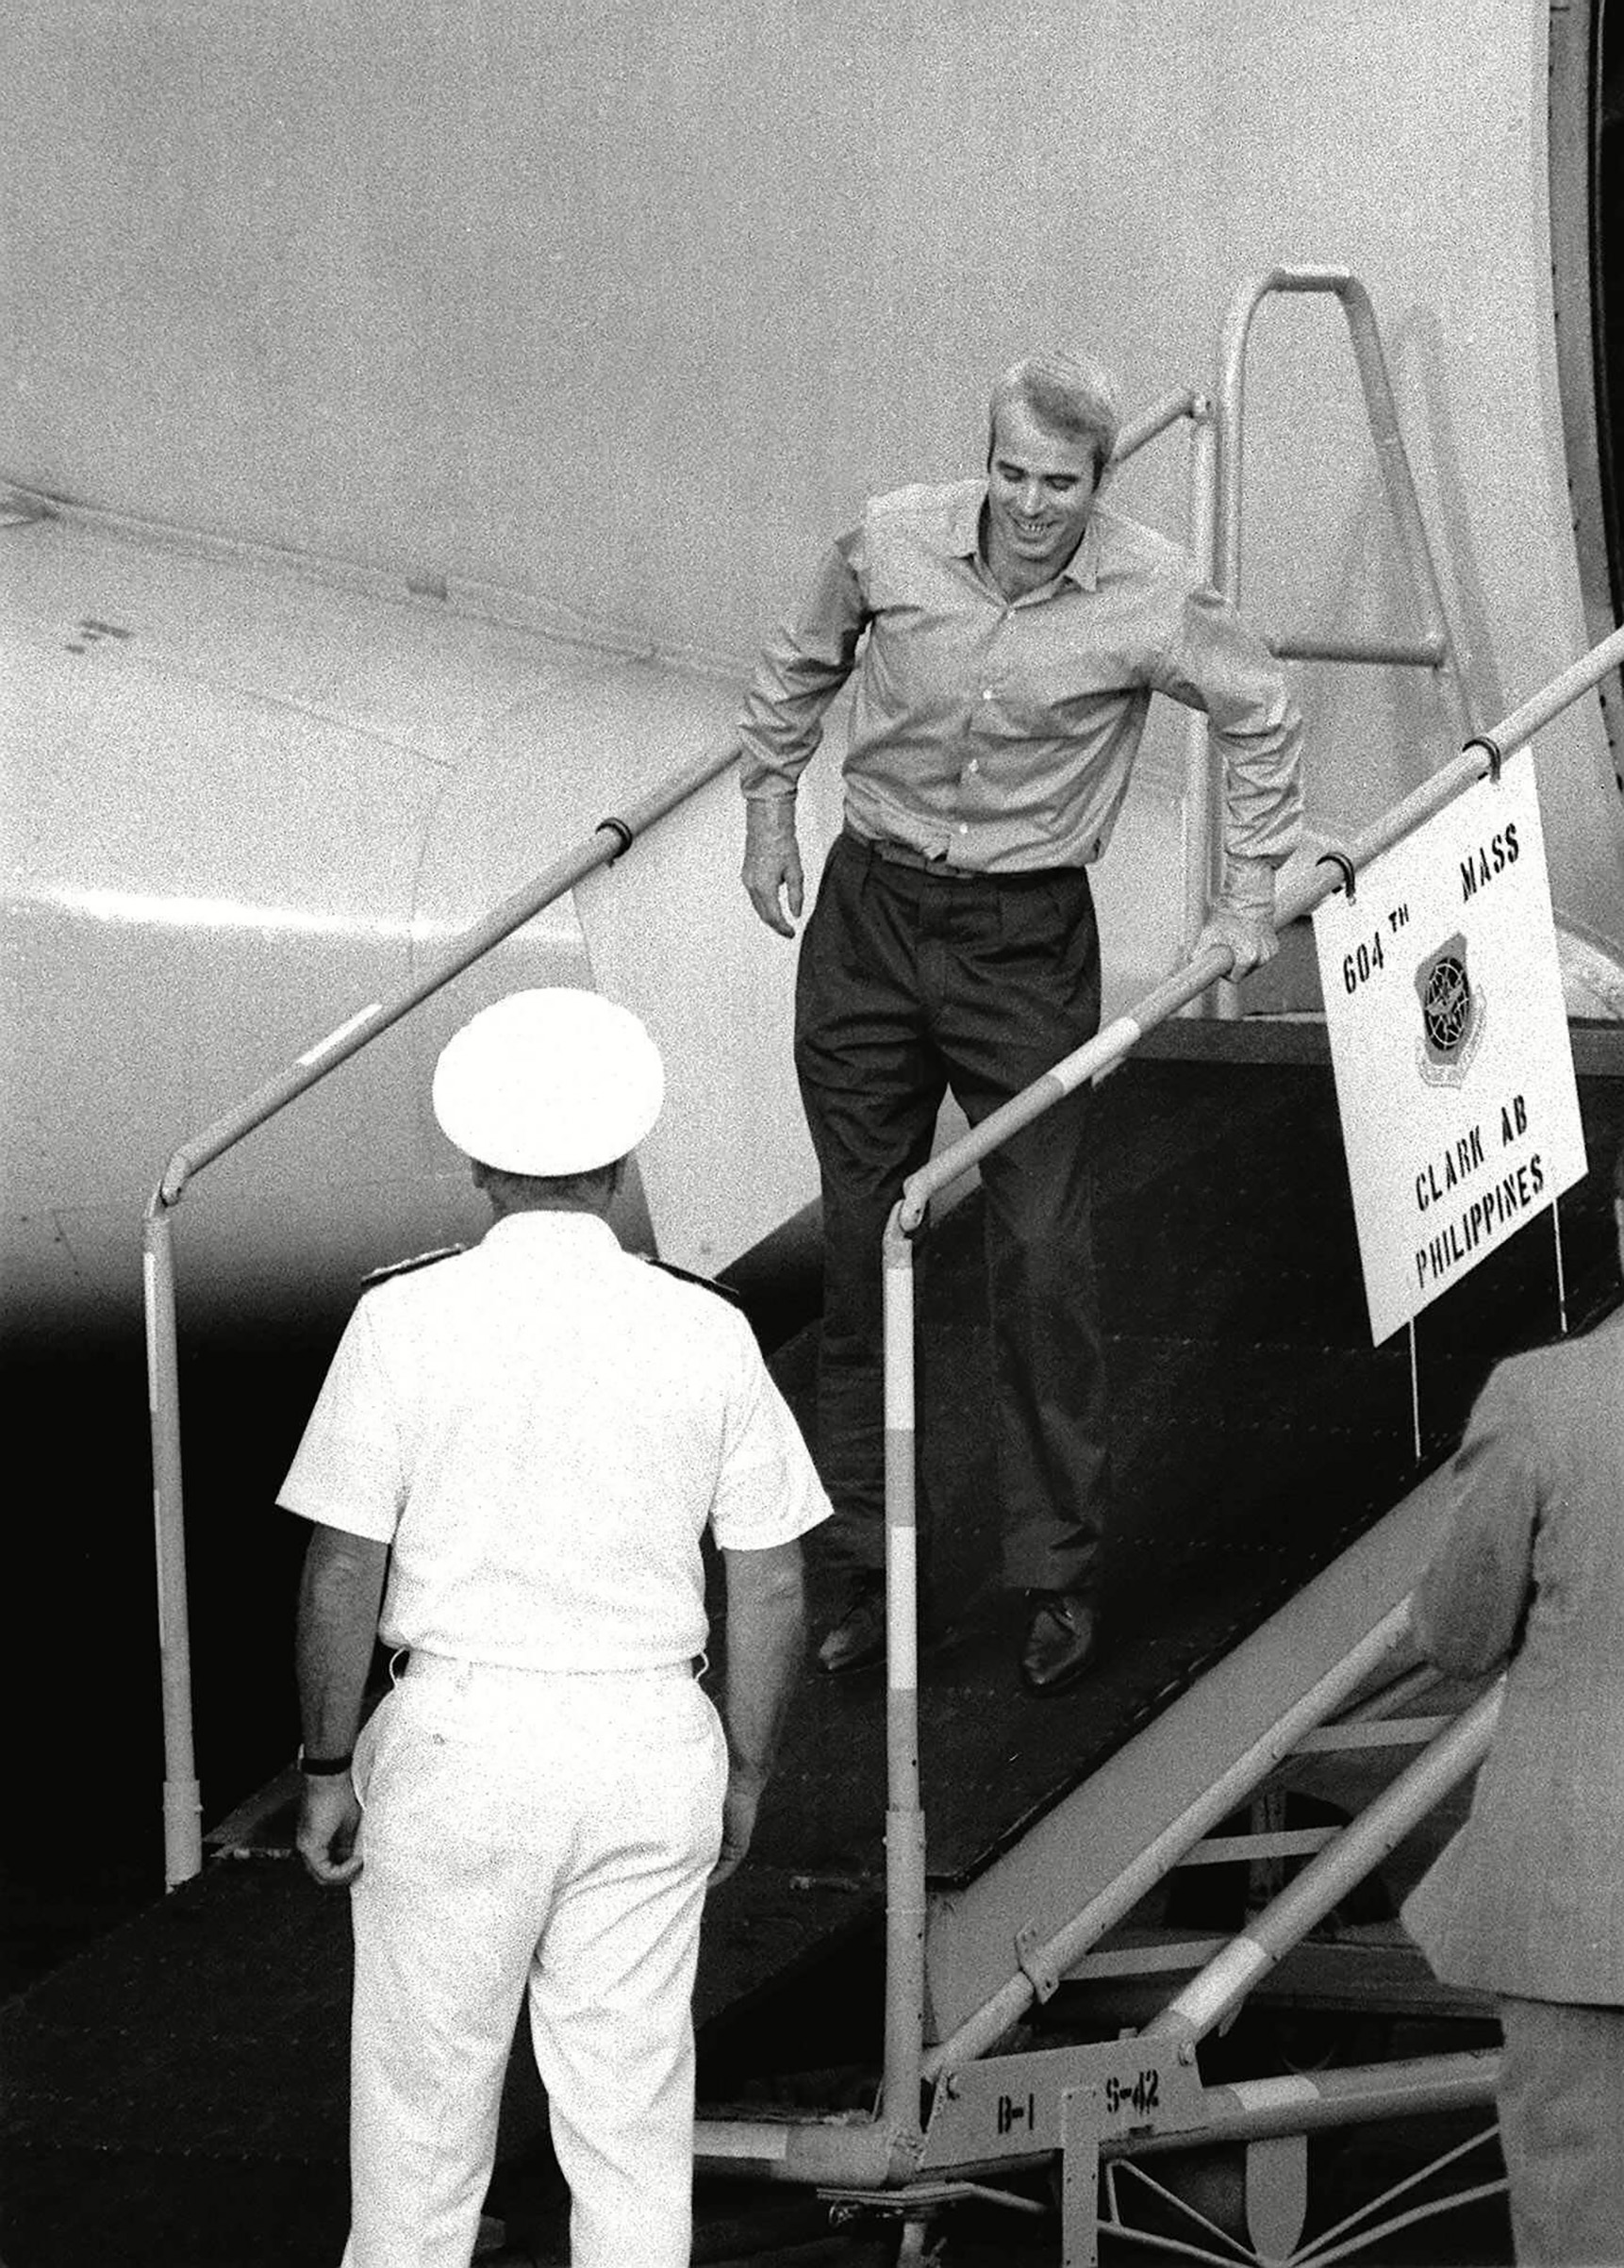 Lt. Cdr. John McCain limps down ramp for a welcome as he arrives at Clark Air Base in The Philippines, from captivity in Hanoi. (AP/REX/Shutterstock)